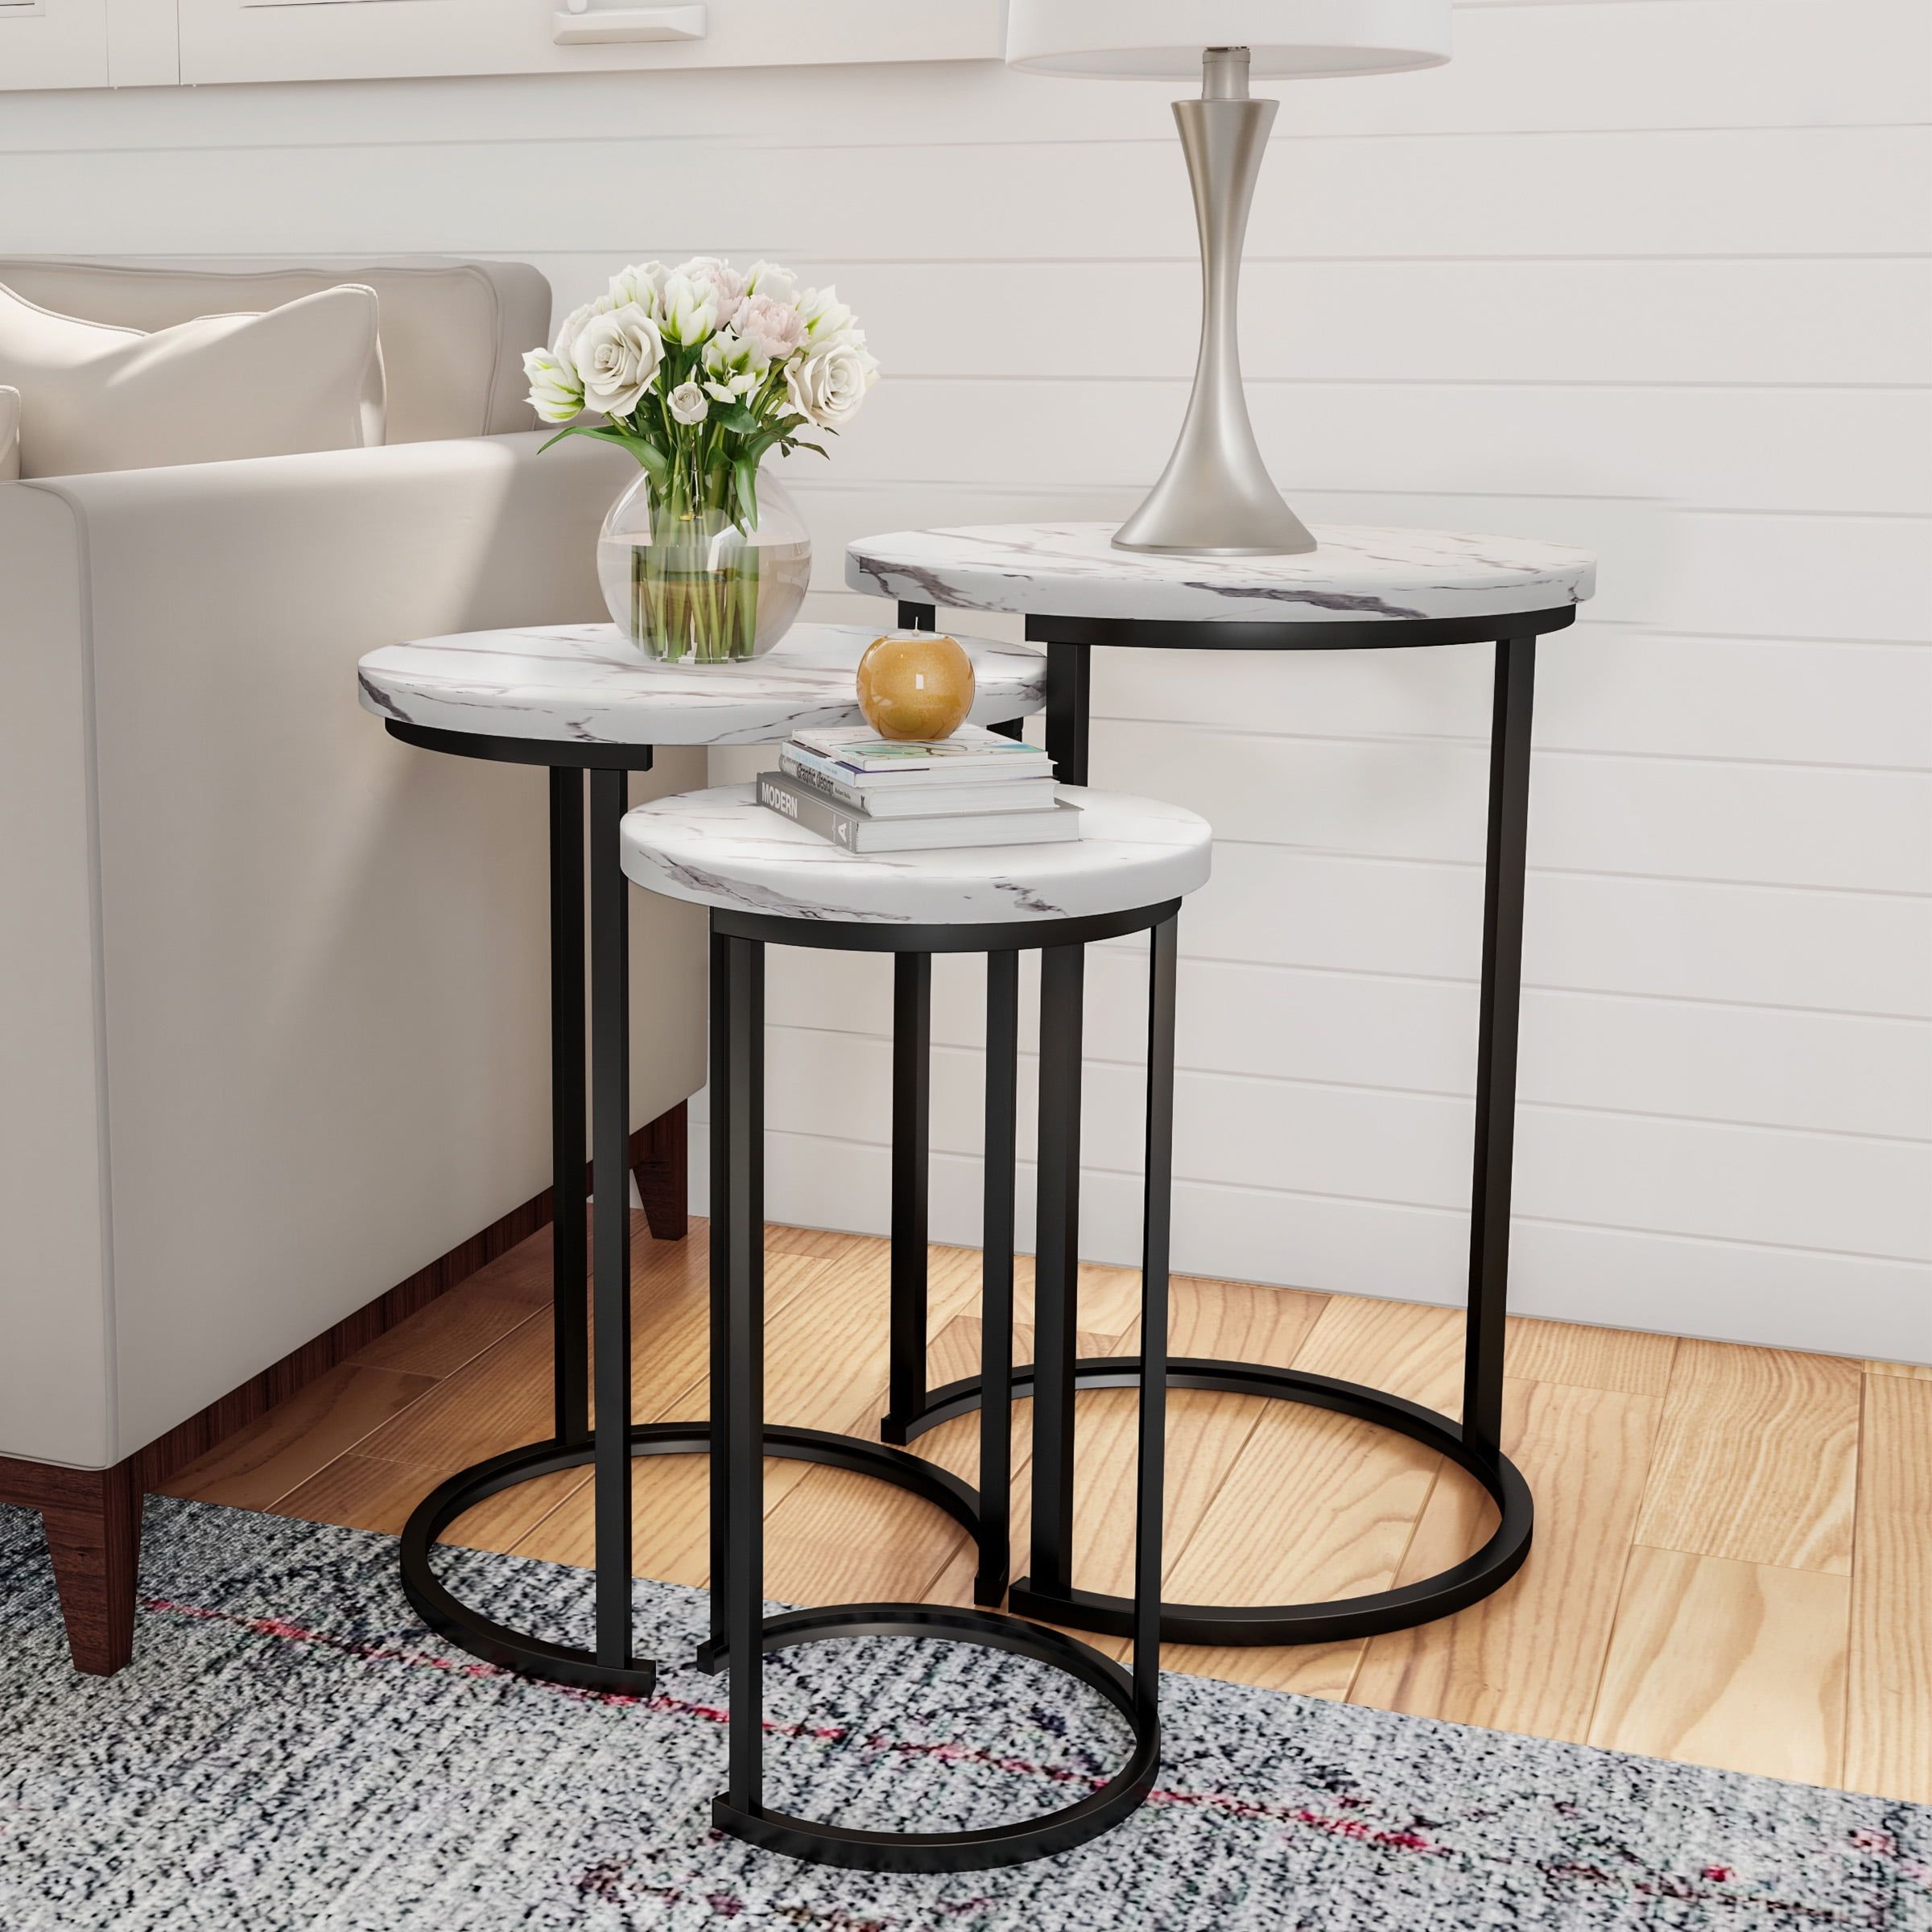 Somerset Home Nesting Tables – Accent Furniture Set Of 3, White Faux Marble  – Walmart Within Coffee Tables Of 3 Nesting Tables (View 2 of 15)